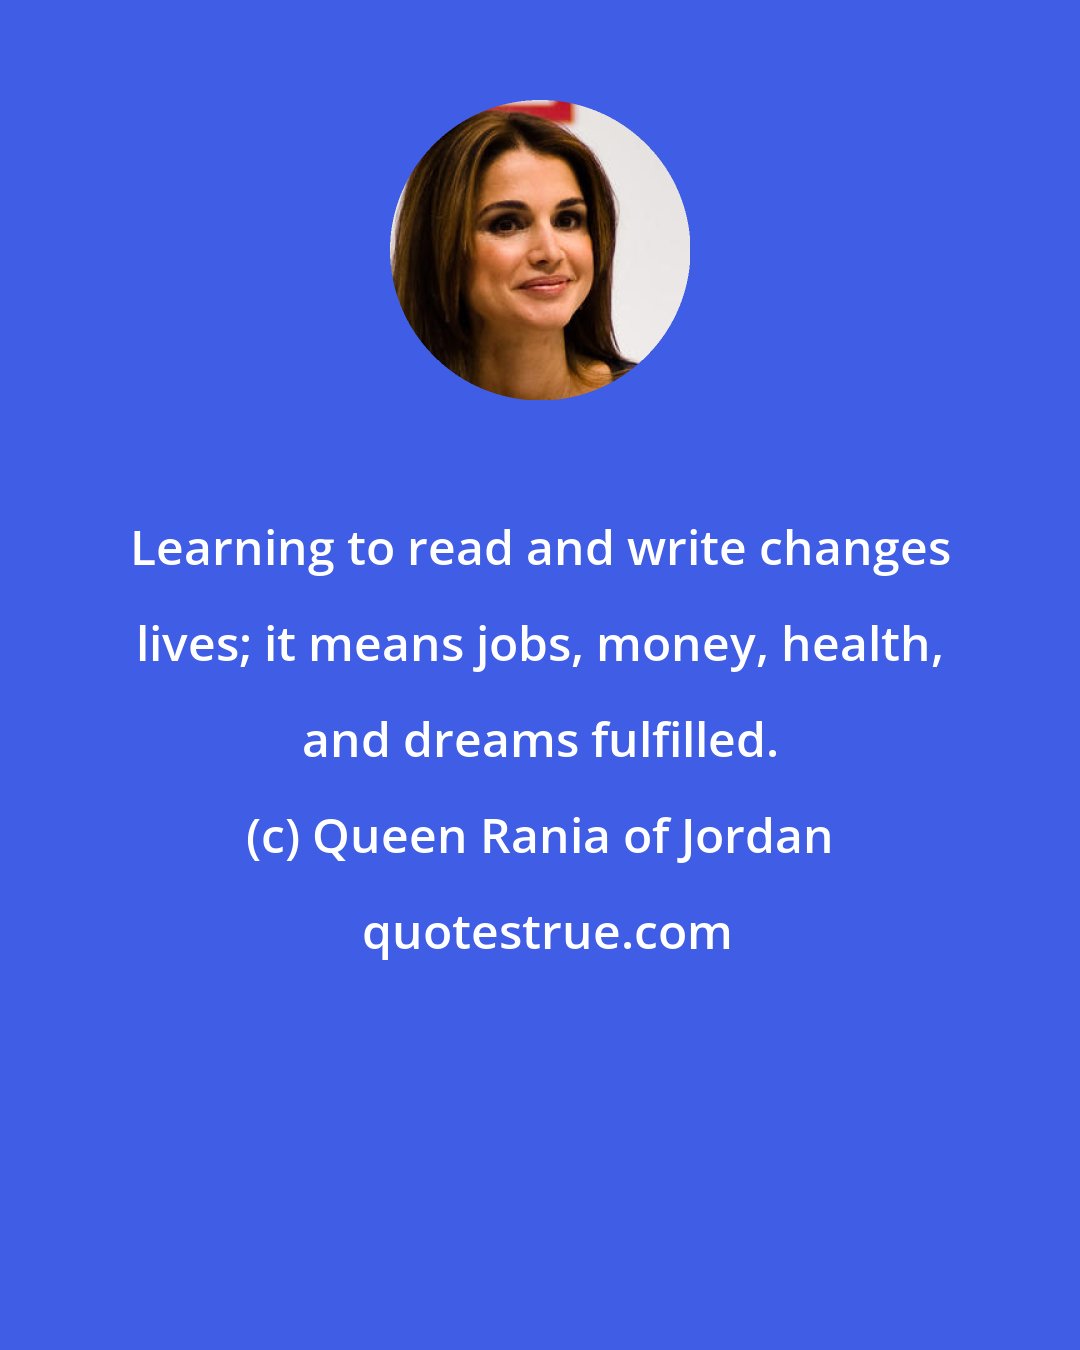 Queen Rania of Jordan: Learning to read and write changes lives; it means jobs, money, health, and dreams fulfilled.